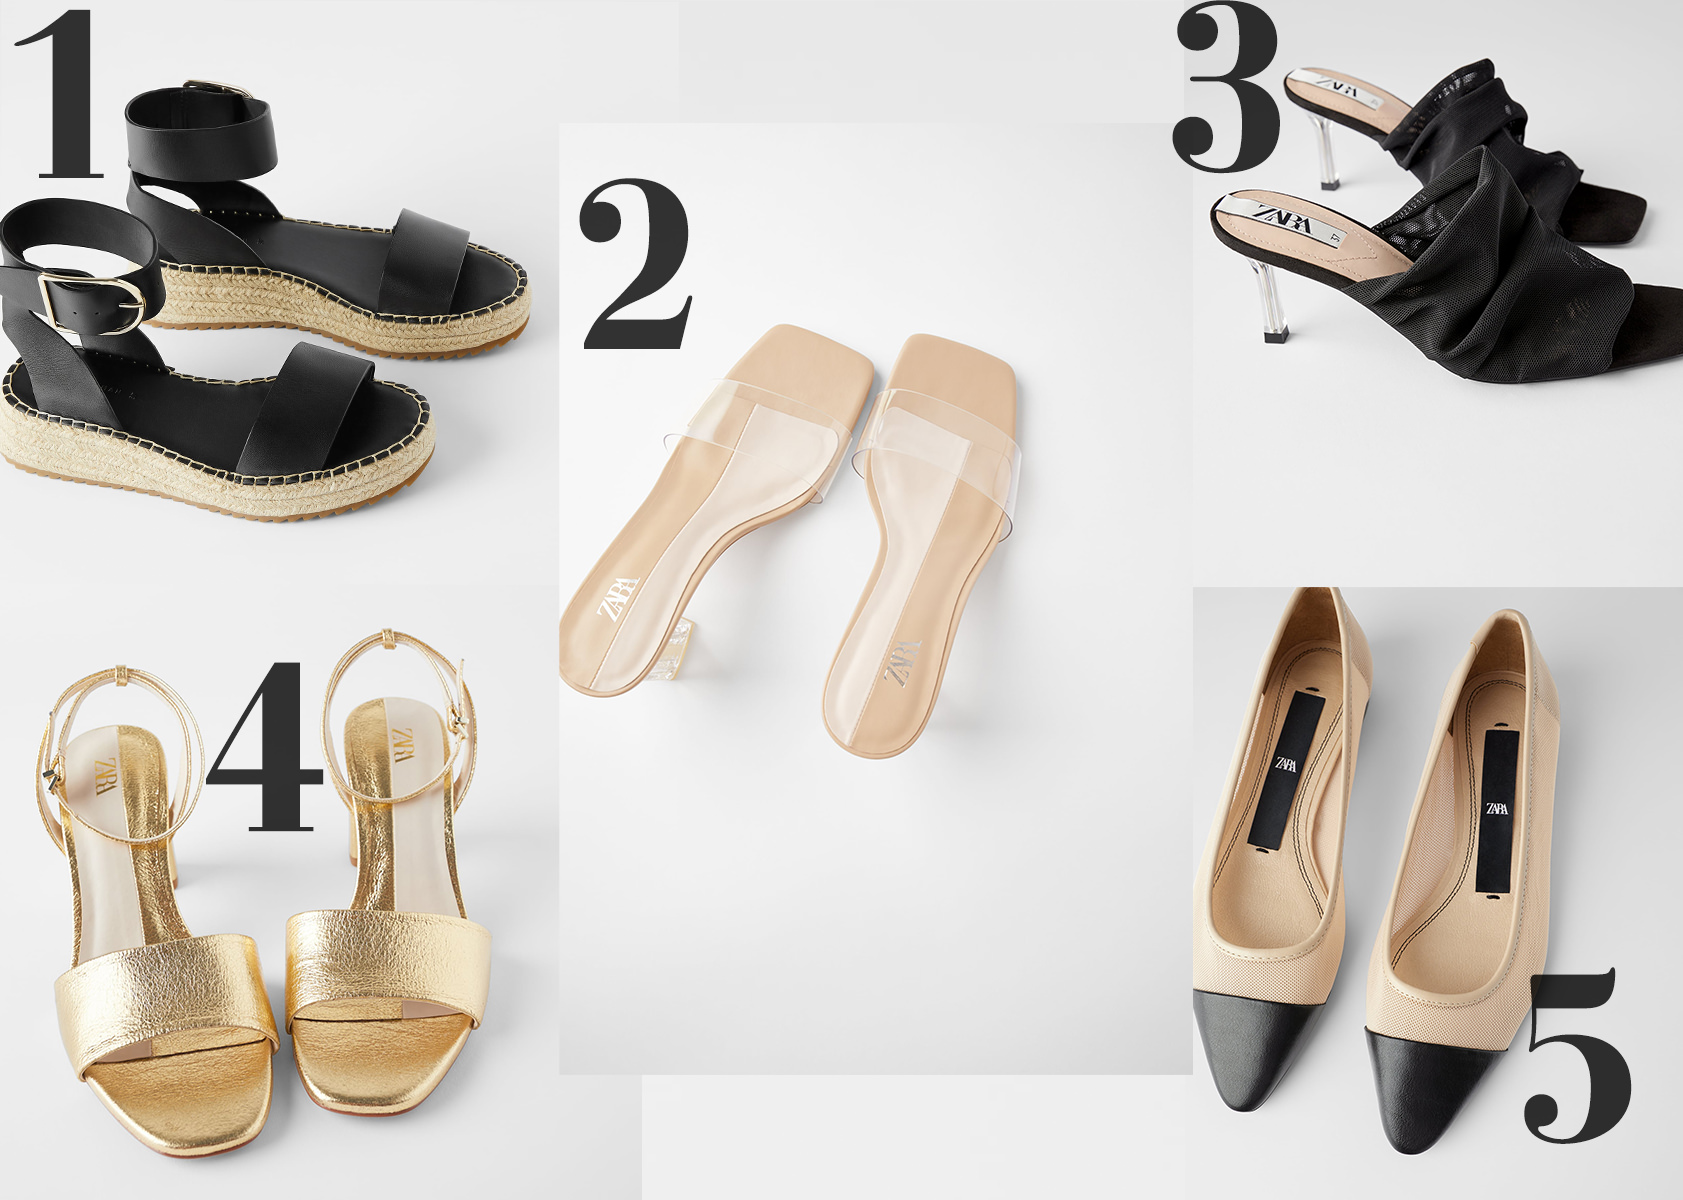 The Top Five Shoes At Zara Right Now